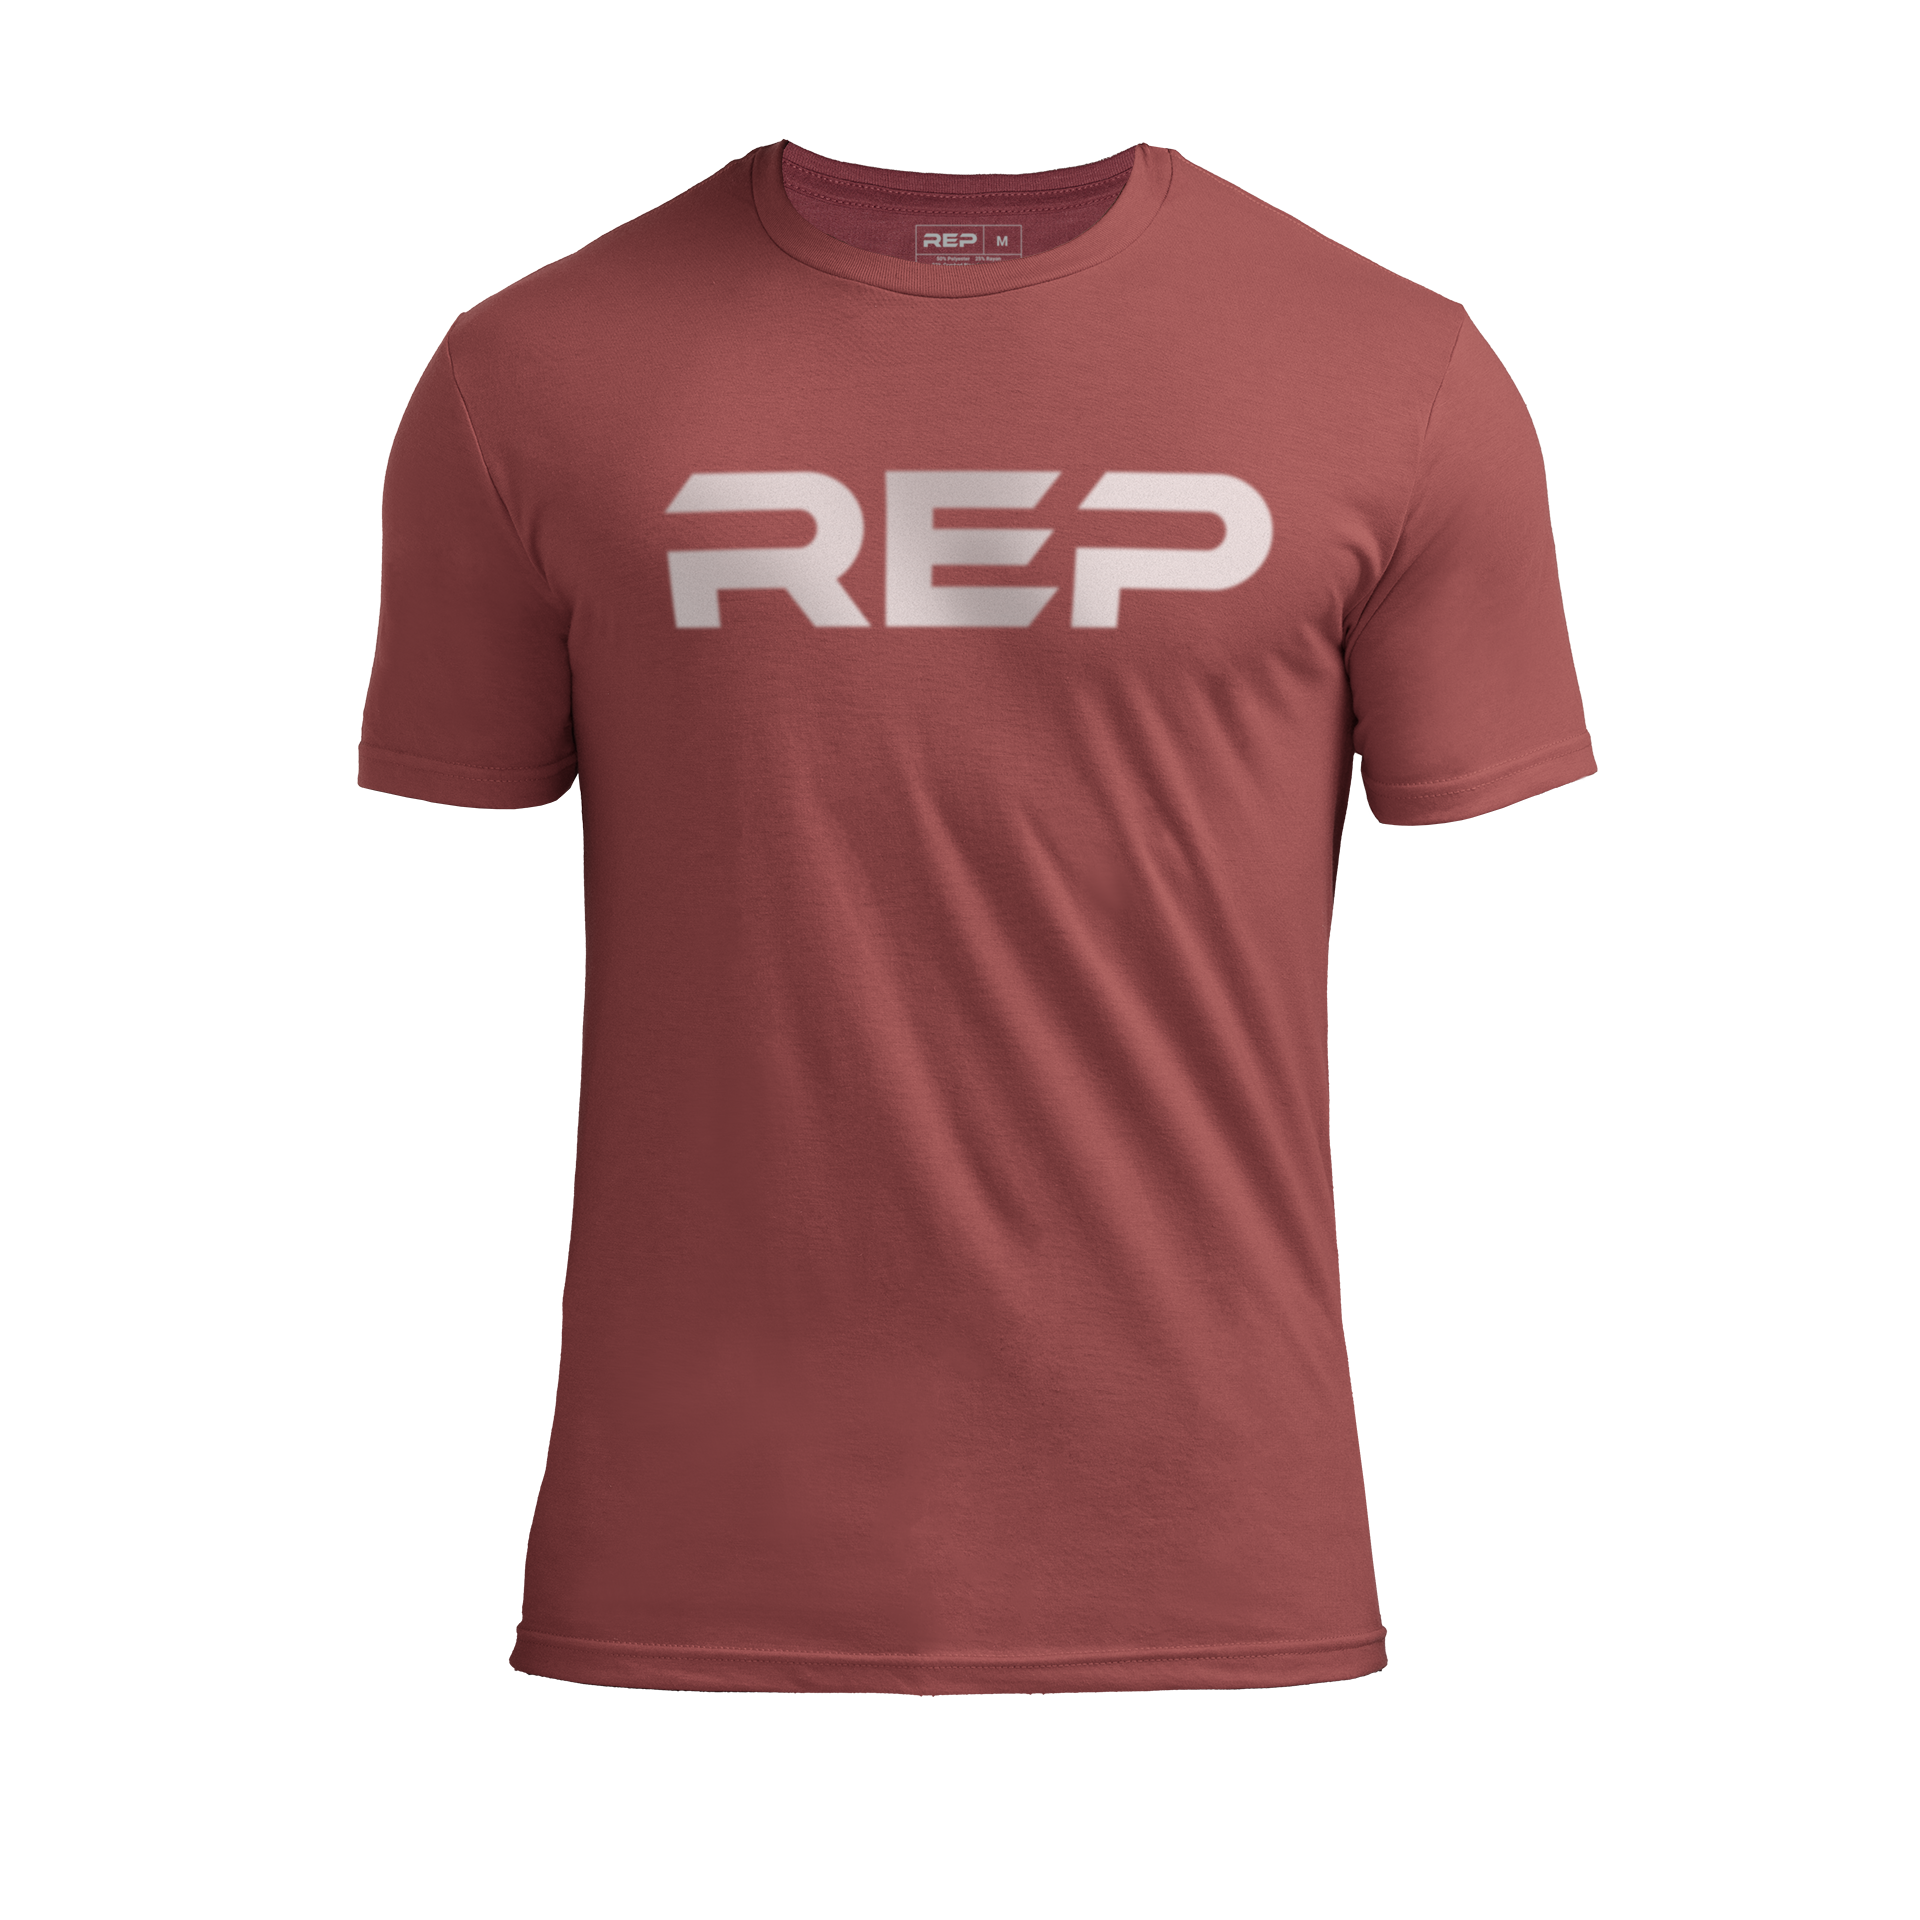 Men's Daily Driver 2.0 Tri-Blend Crew - Heather Maroon/White / X-Small